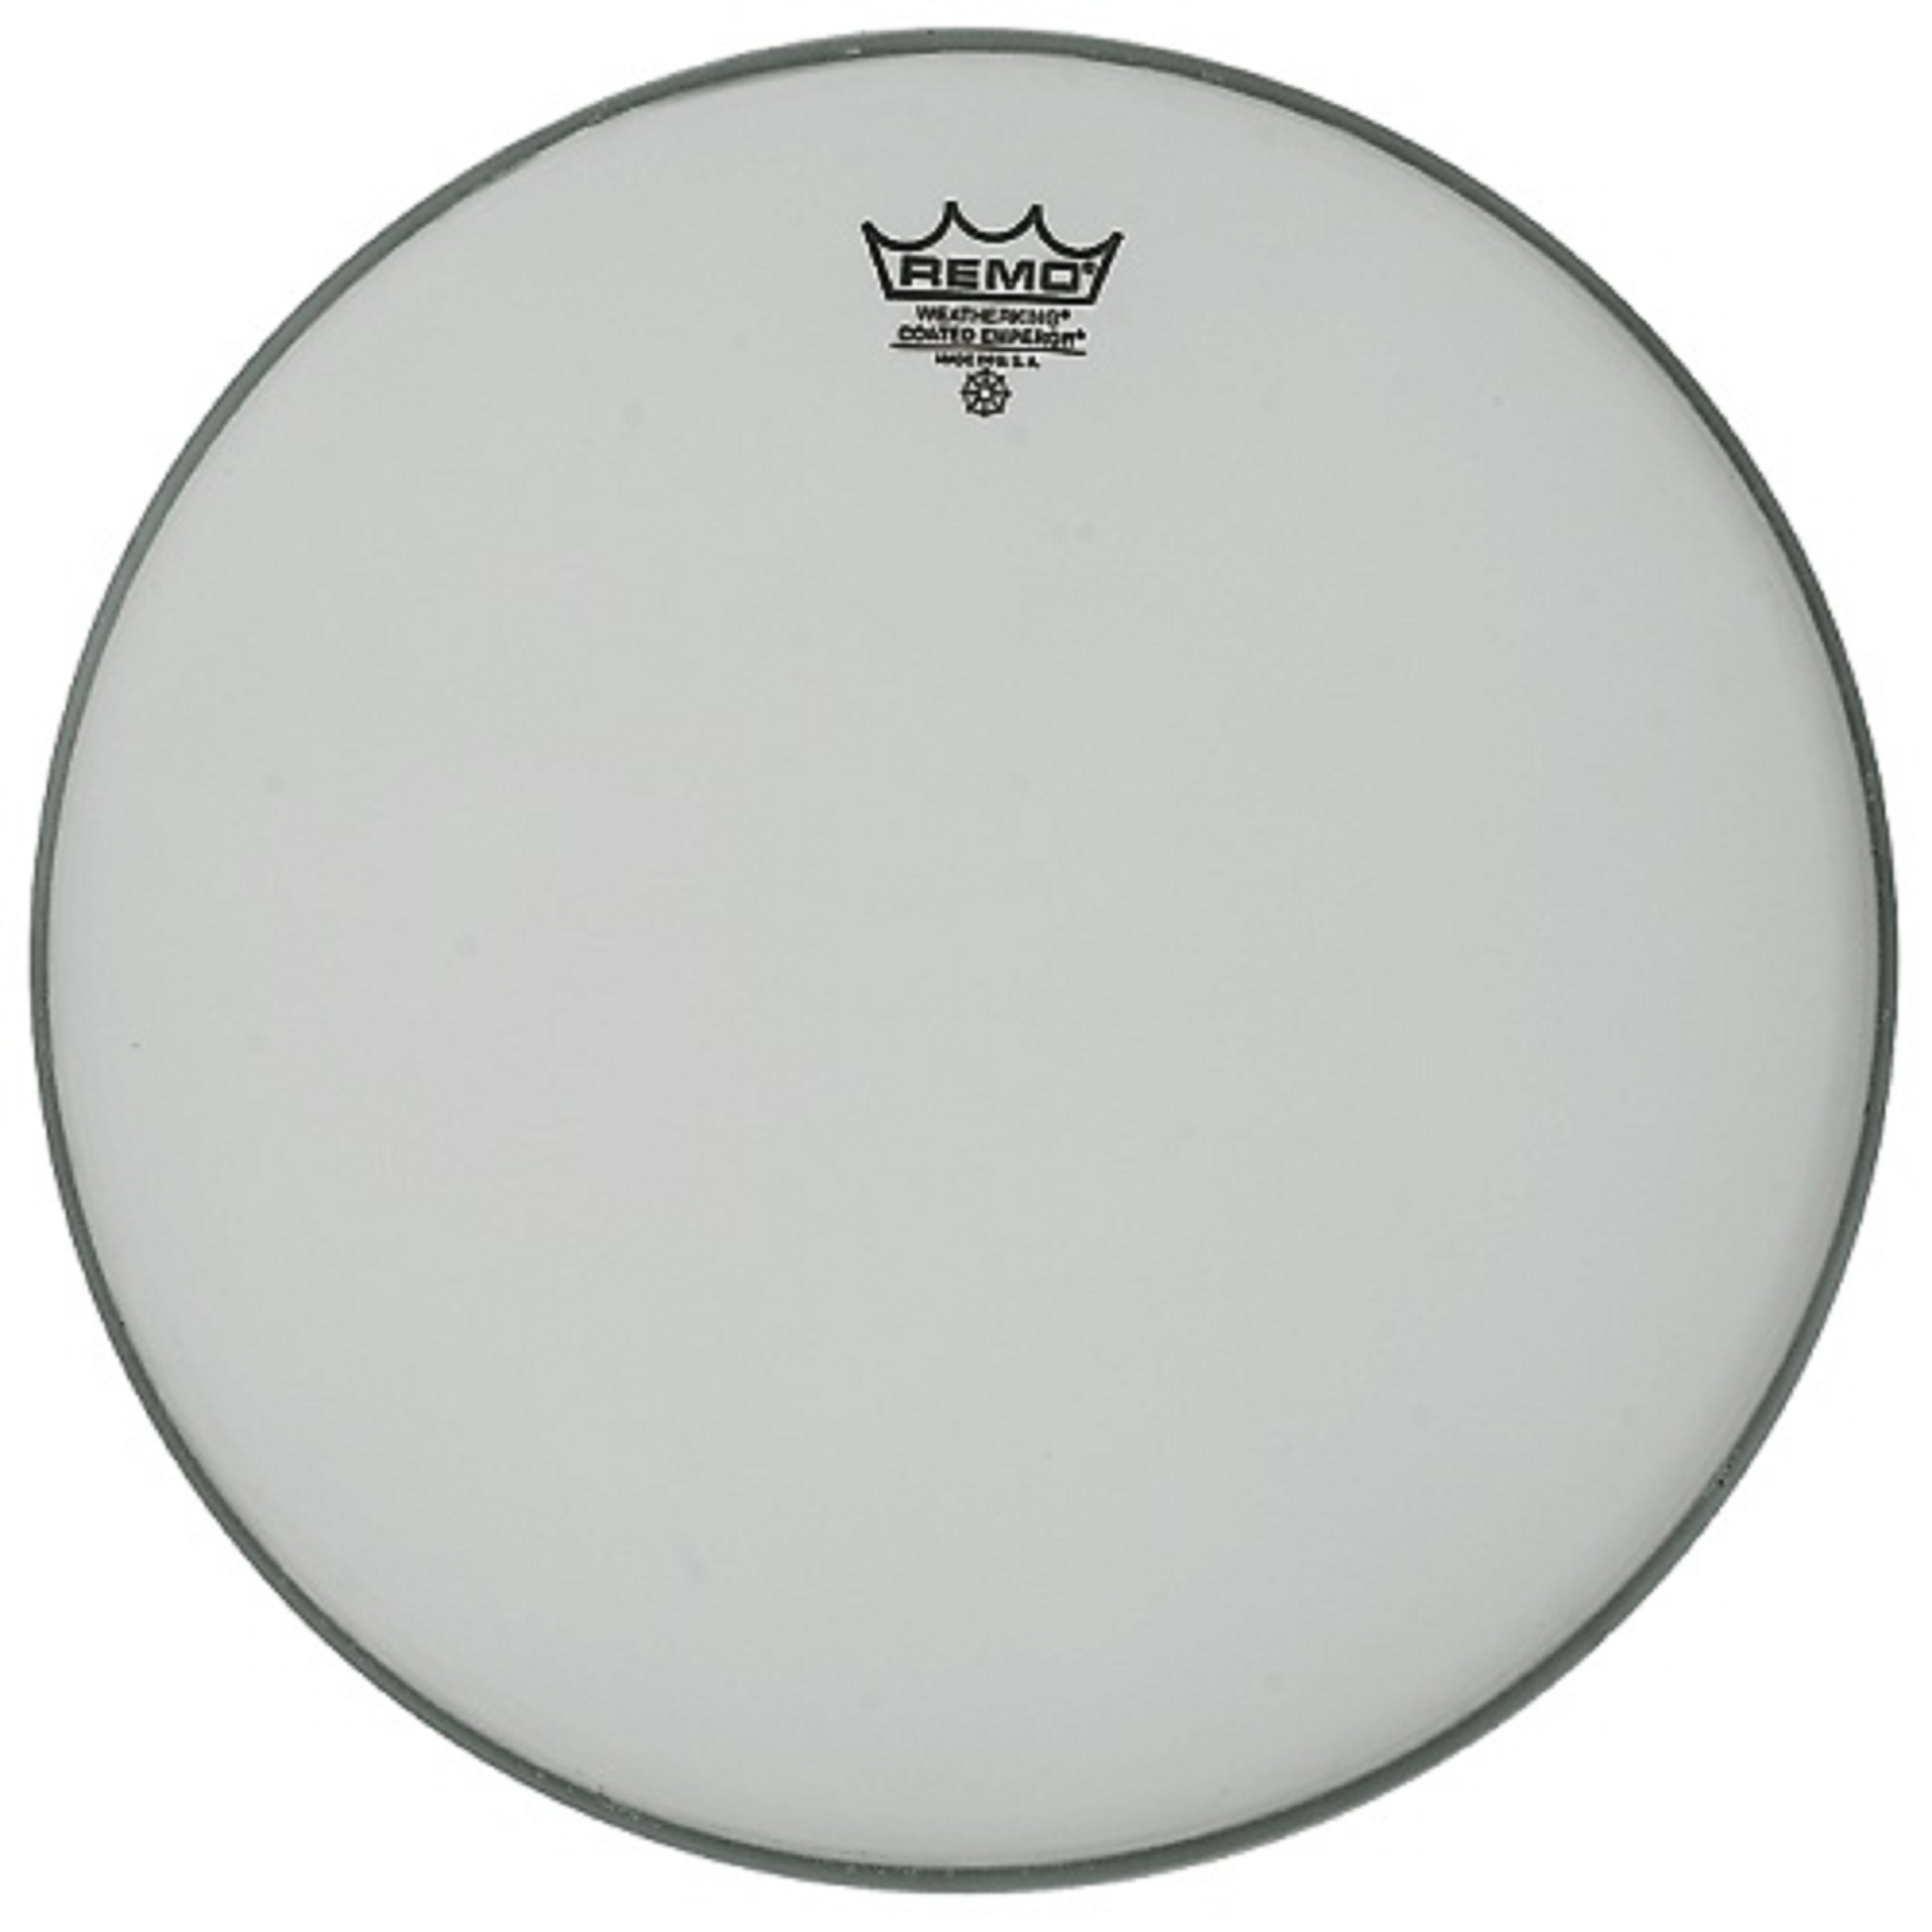 Remo Fell Emperor 12" Coated